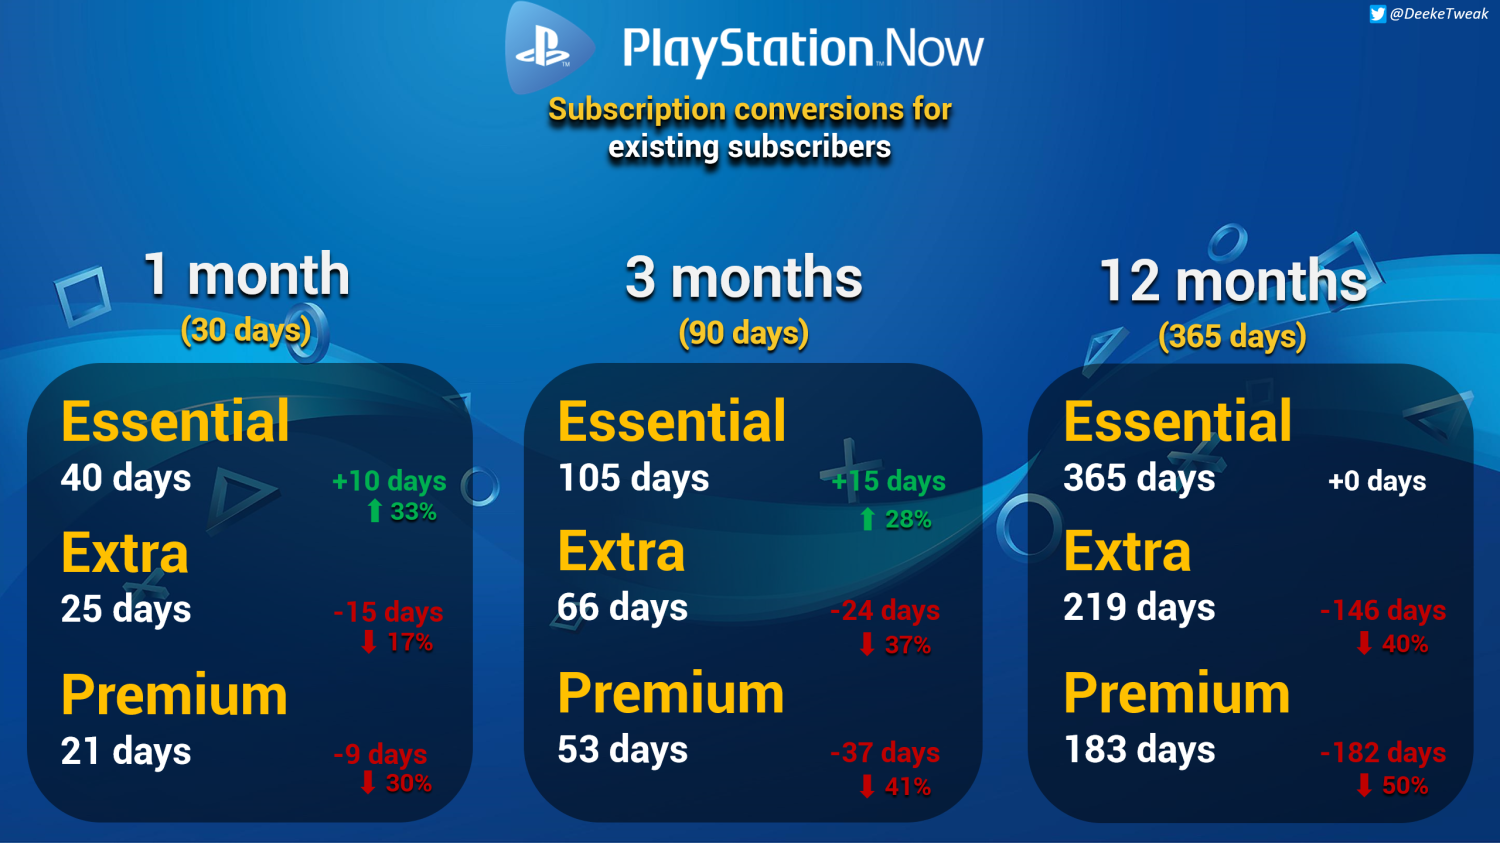 PS Plus annual subscription price just got up to 35% more expensive